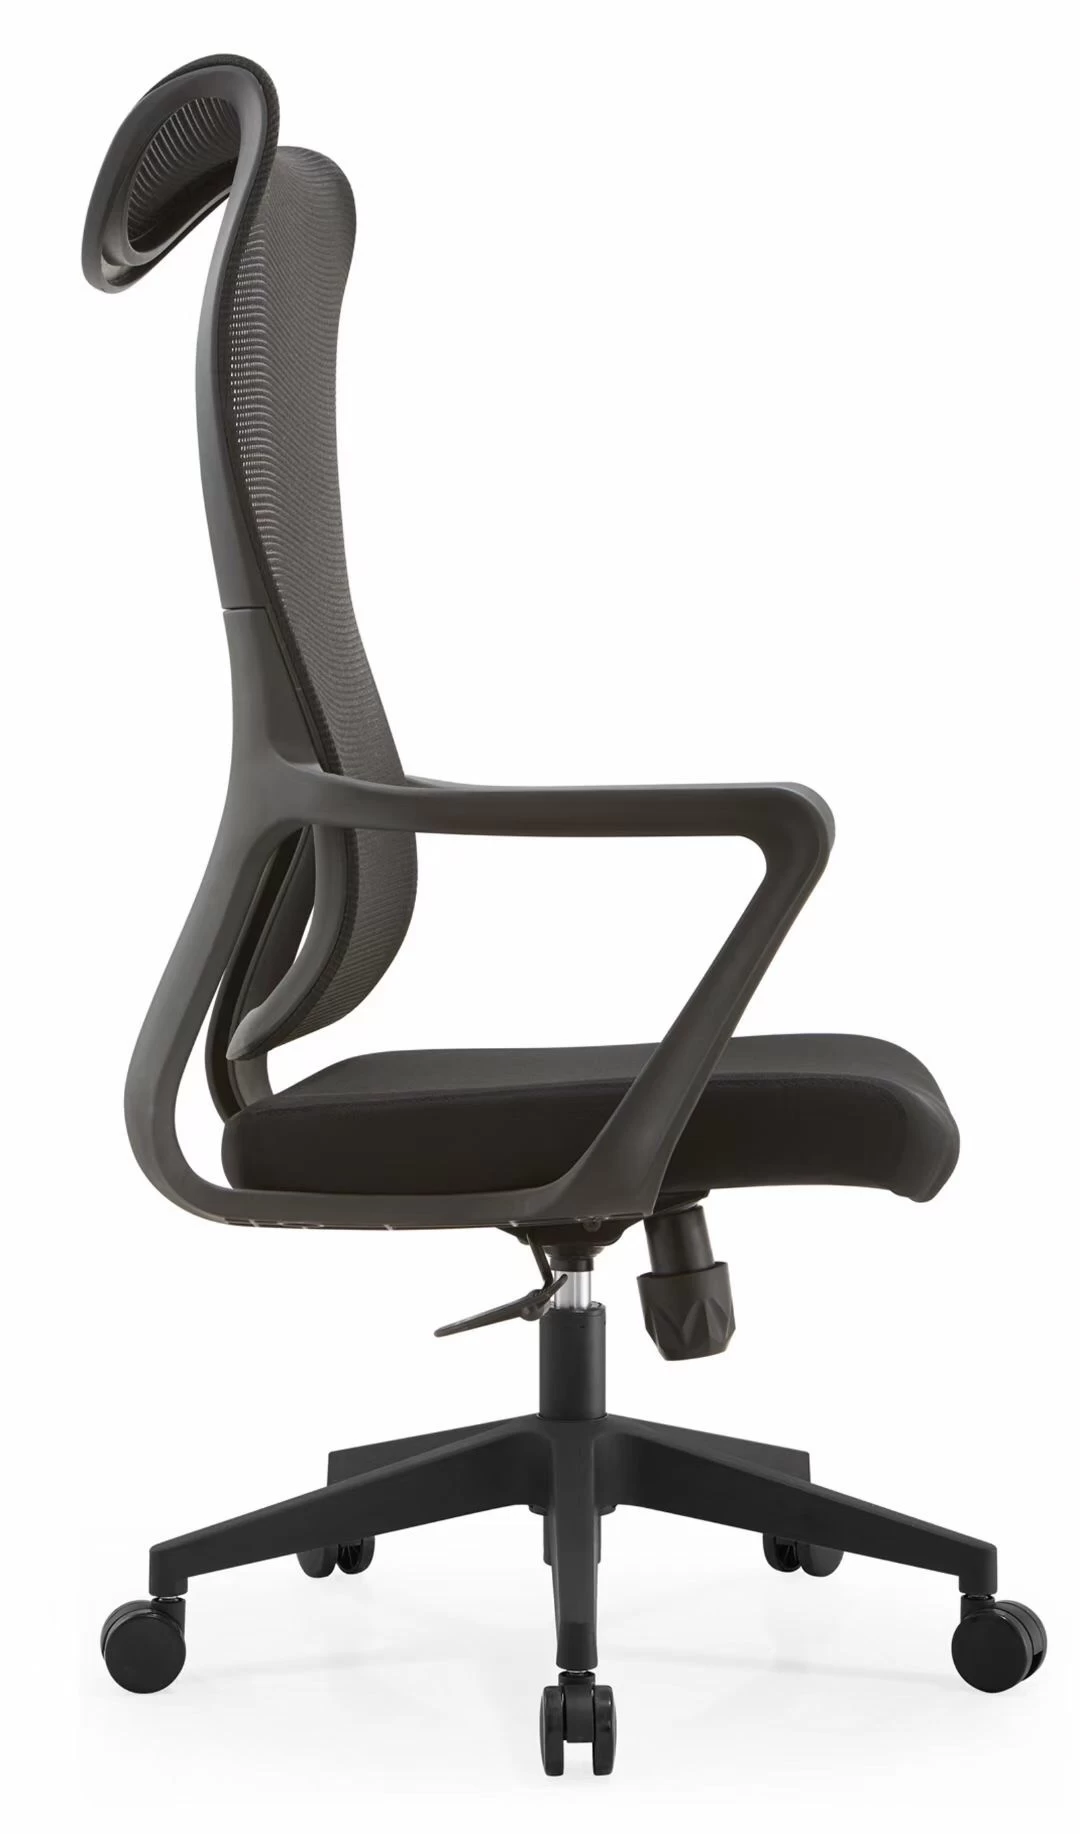 Newcity N1606 Classy And Sophisticated Mesh Chair Sleek Lines And Neutral Tones Flatter Most Interiors Office Chair Chinese Manufacture